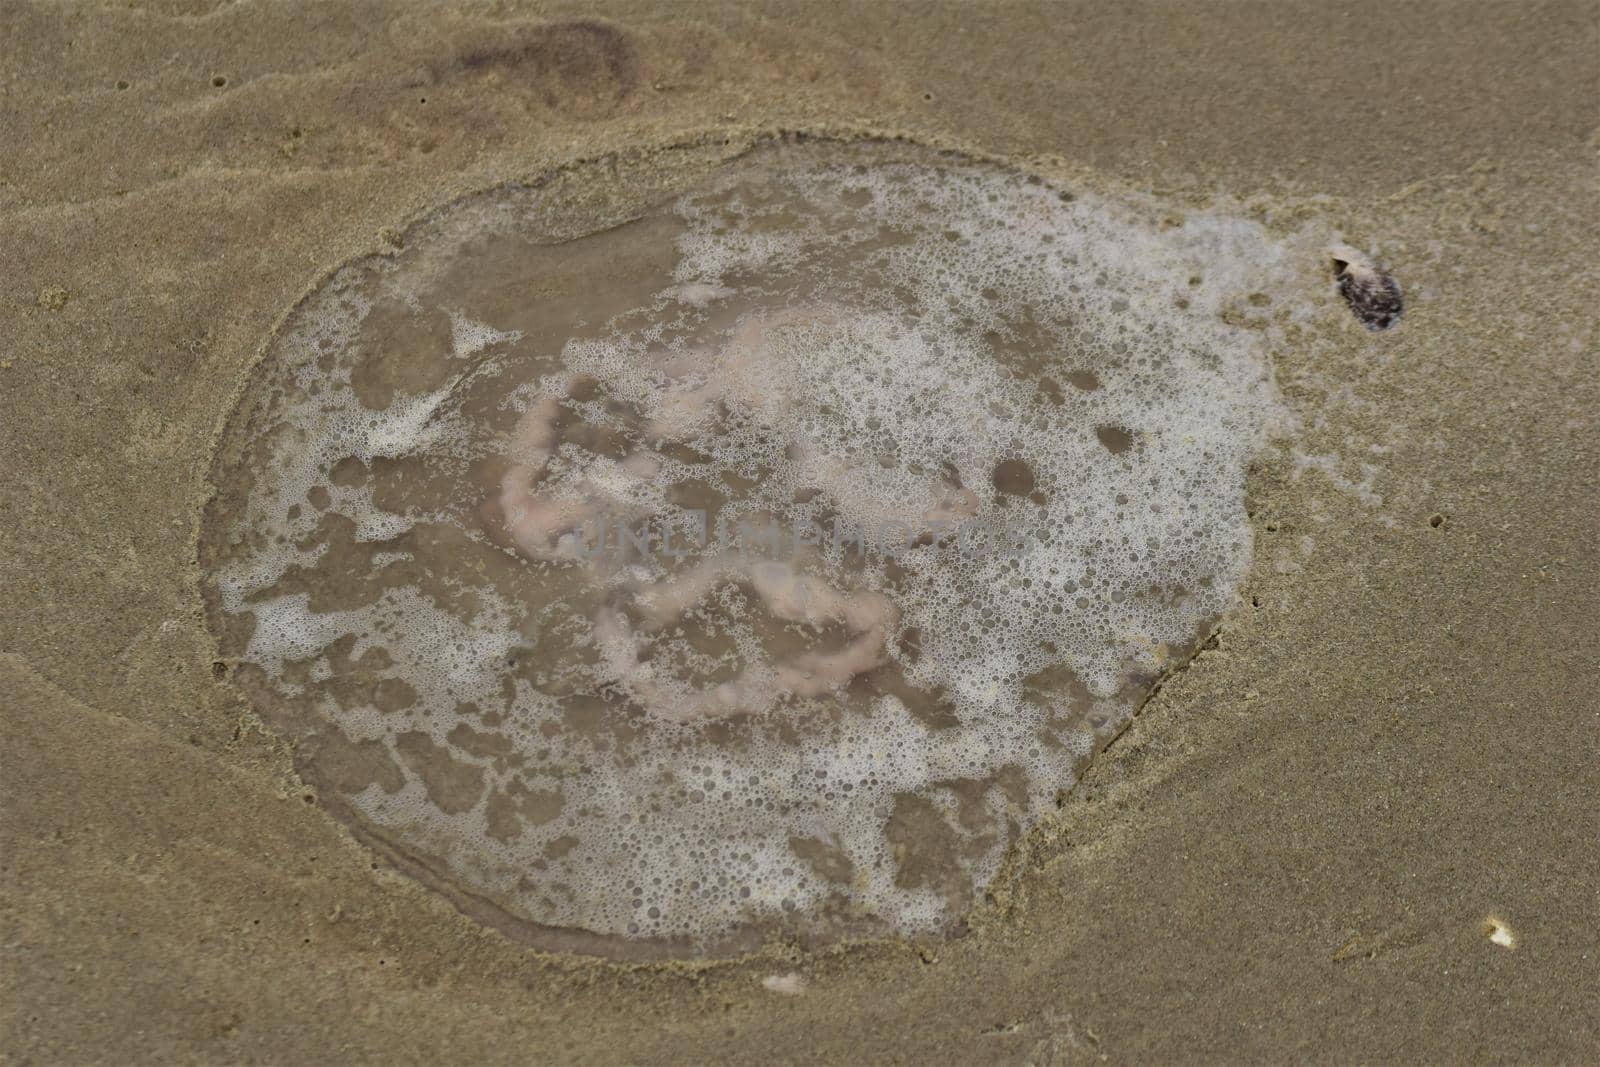 Close up of a jellyfish on the beach by Luise123